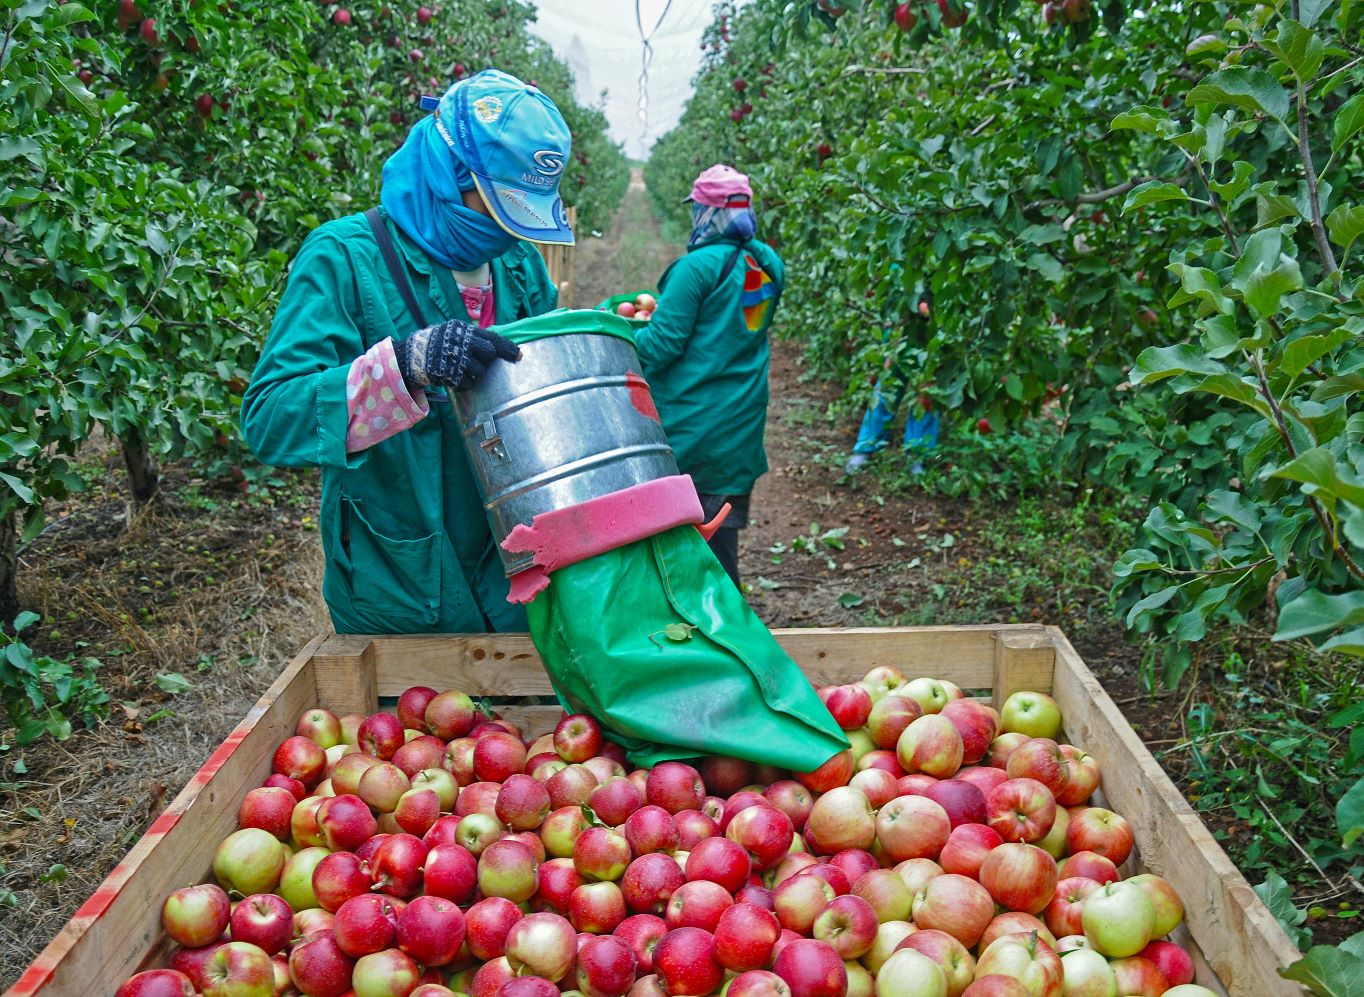 WA Farmworker Union Sues U.S. Department of Labor Over Failure to Protect Harvest Wages